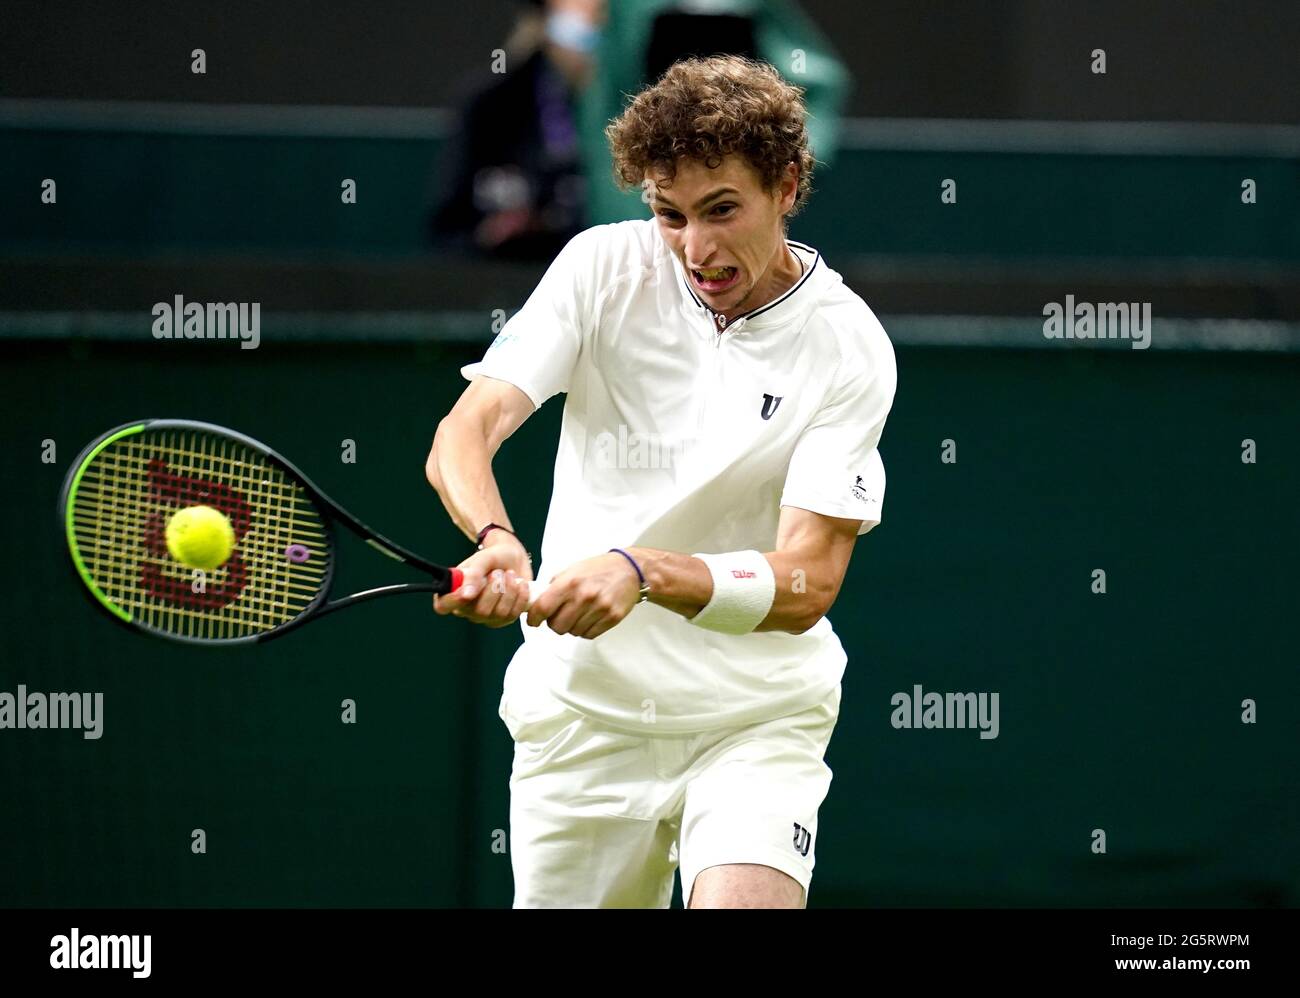 Ugo Humbert in action during his first round gentlemen's singles match against Nick Kyrgios on court 1 on day two of Wimbledon at The All England Lawn Tennis and Croquet Club, Wimbledon. Picture date: Tuesday June 29, 2021. Stock Photo